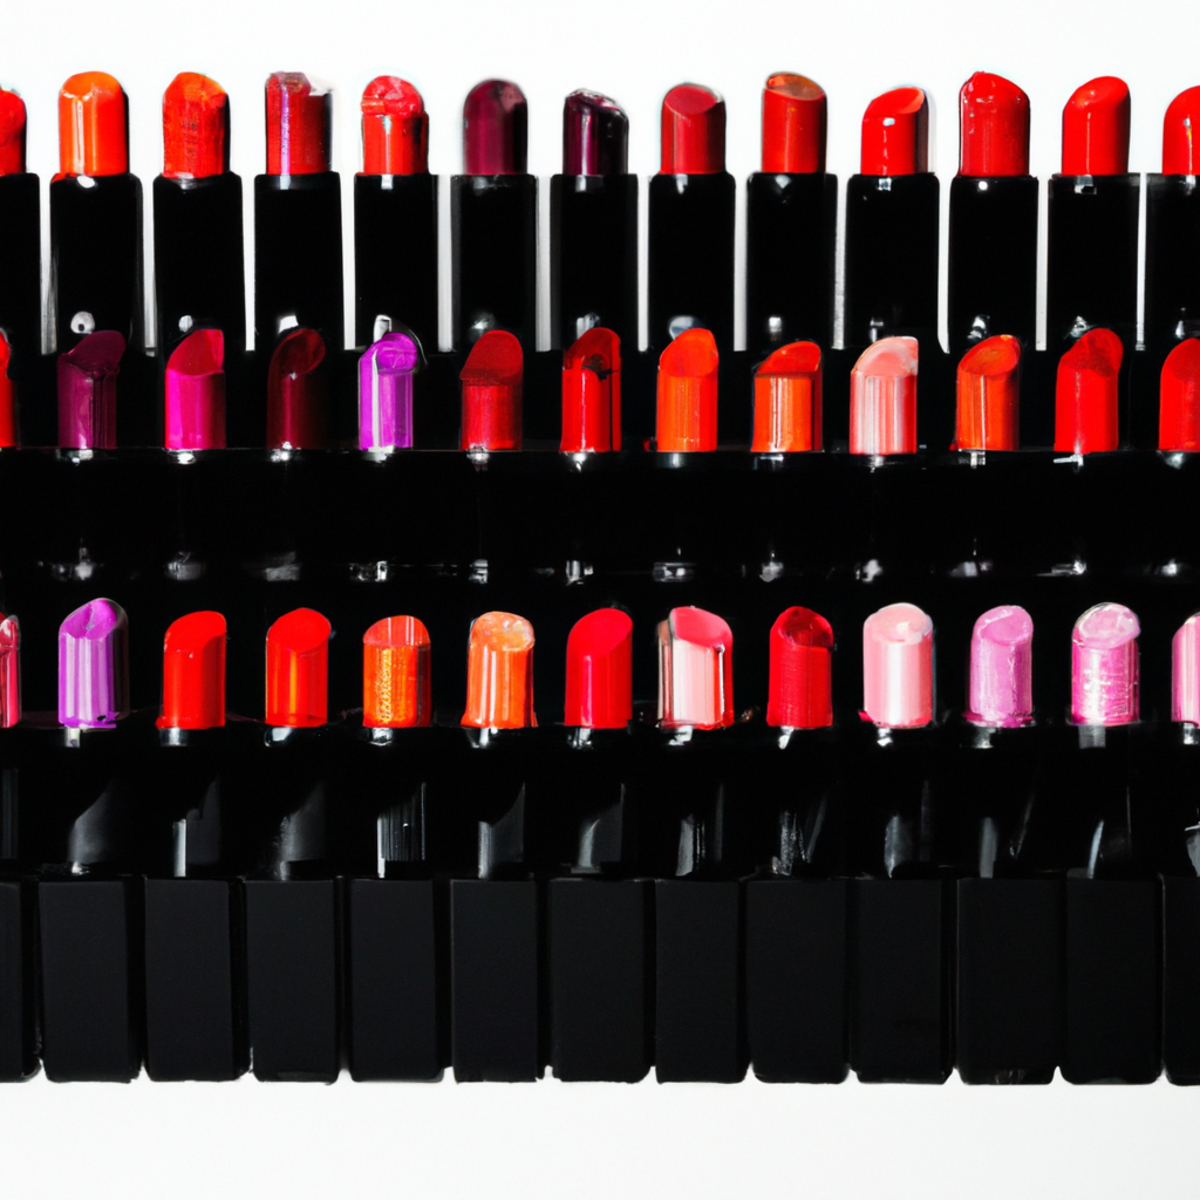 Close-up of vibrant lip colors arranged artistically, showcasing bold shades from fiery reds to daring oranges.